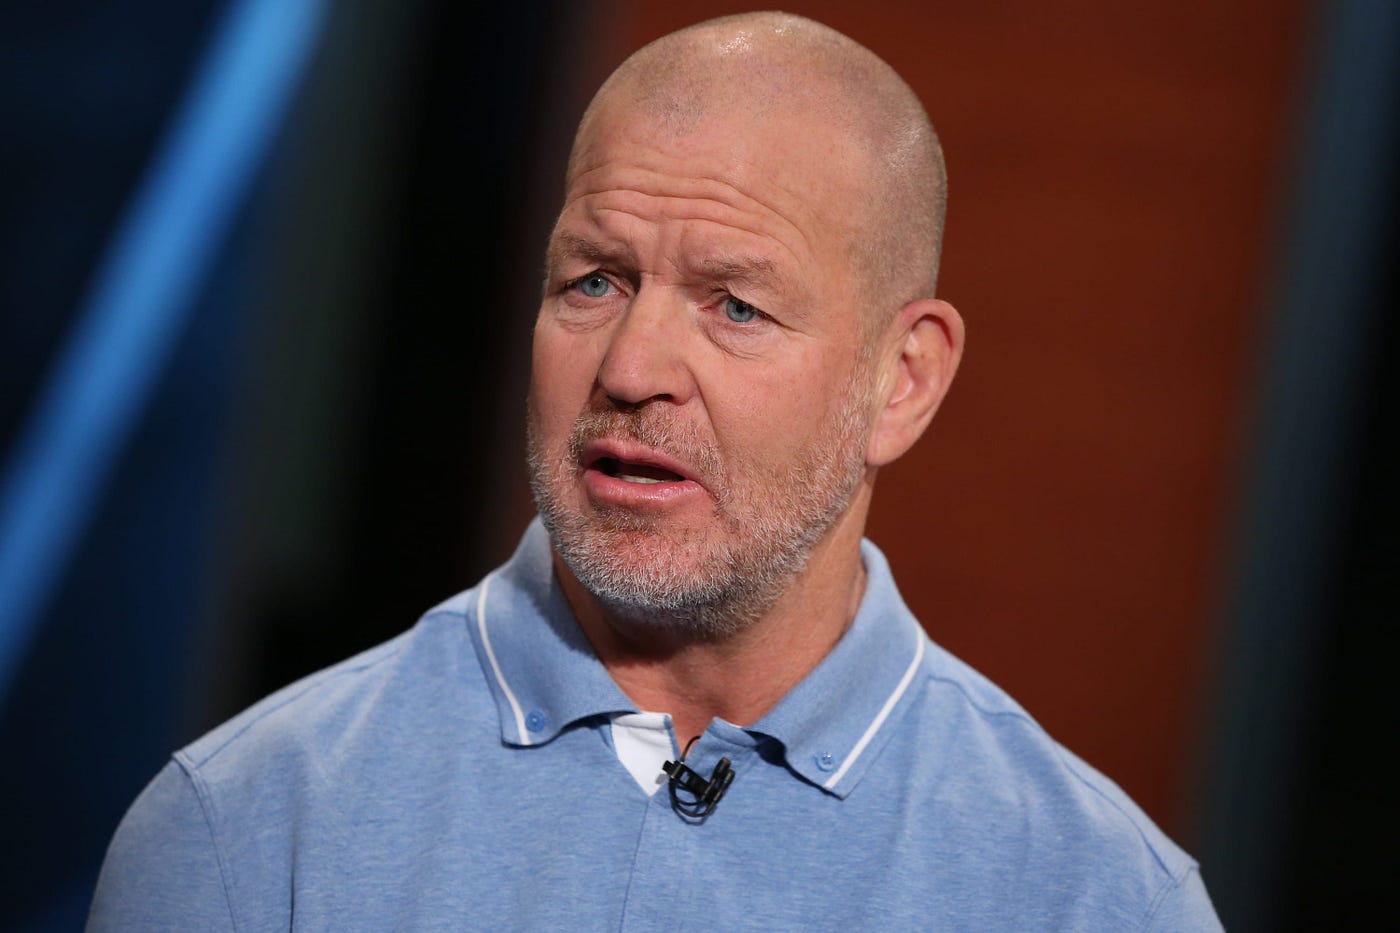 Lululemon Founder Chip Wilson is the Face of Canada's Vicious